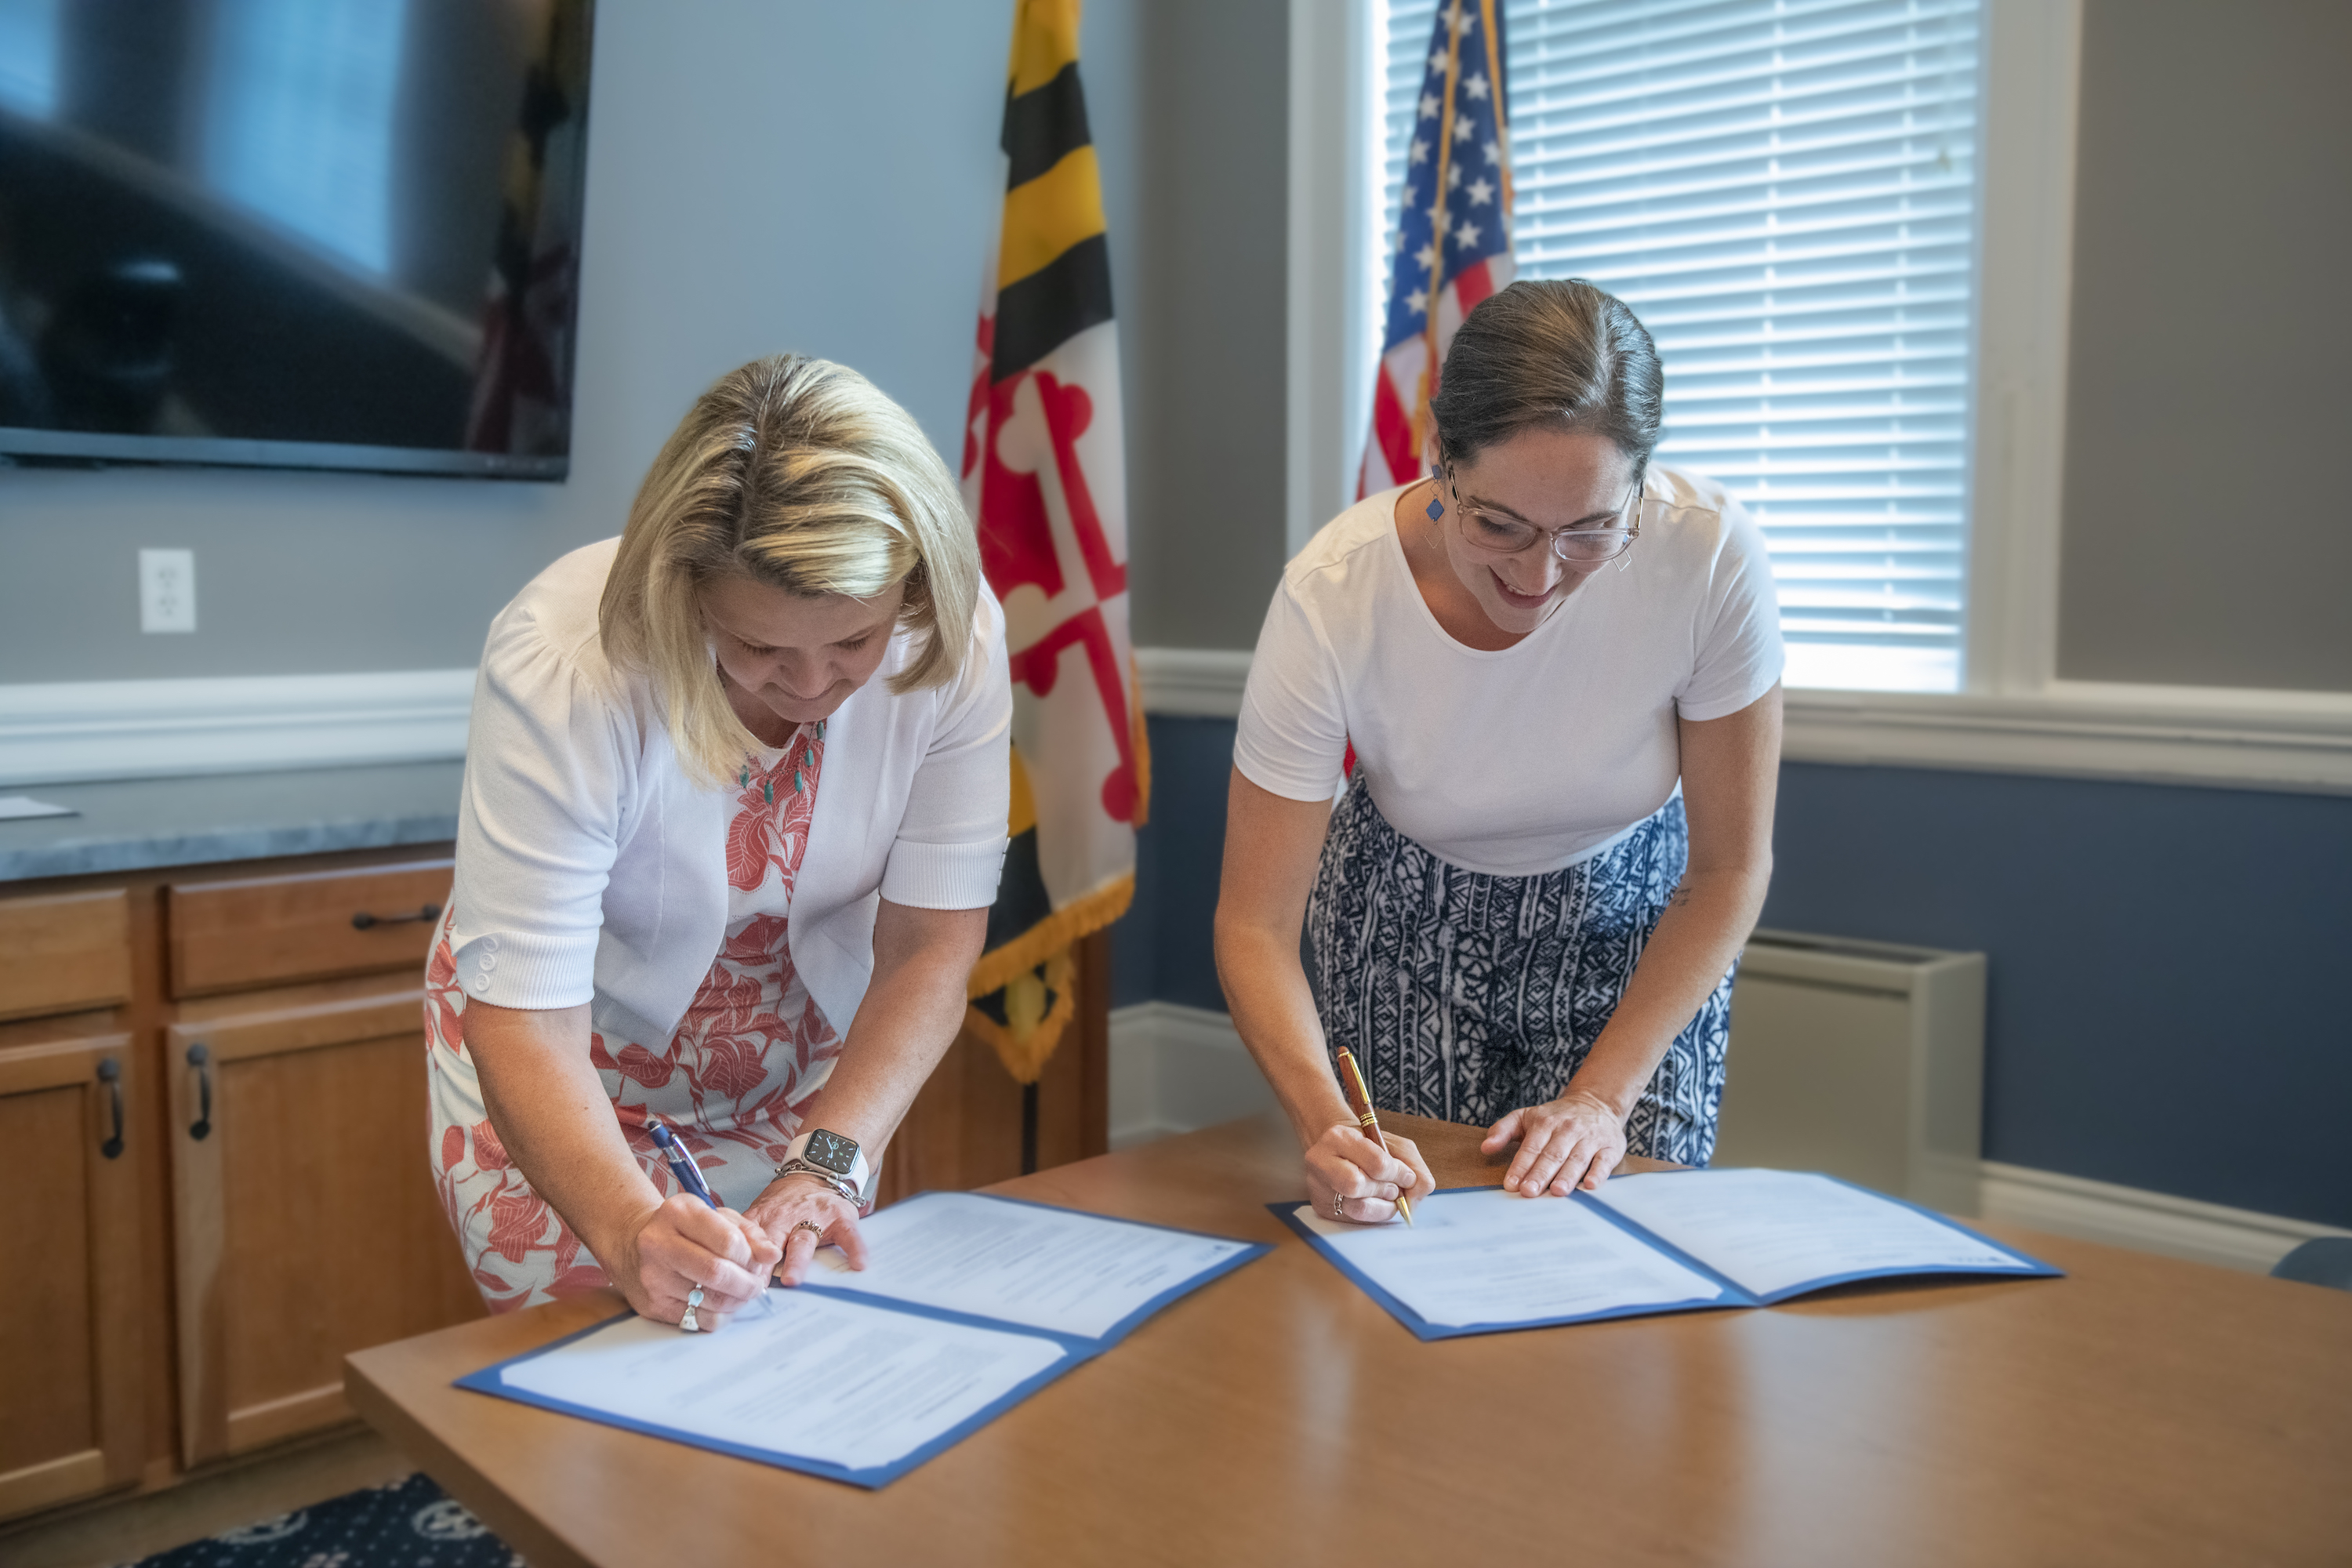 Andrea E. Chapdelaine, Ph.D., president of Hood College, and Jessica Fitzwater, M.S.'10, Frederick County executive, sign NeighborHOOD Partnership agreements